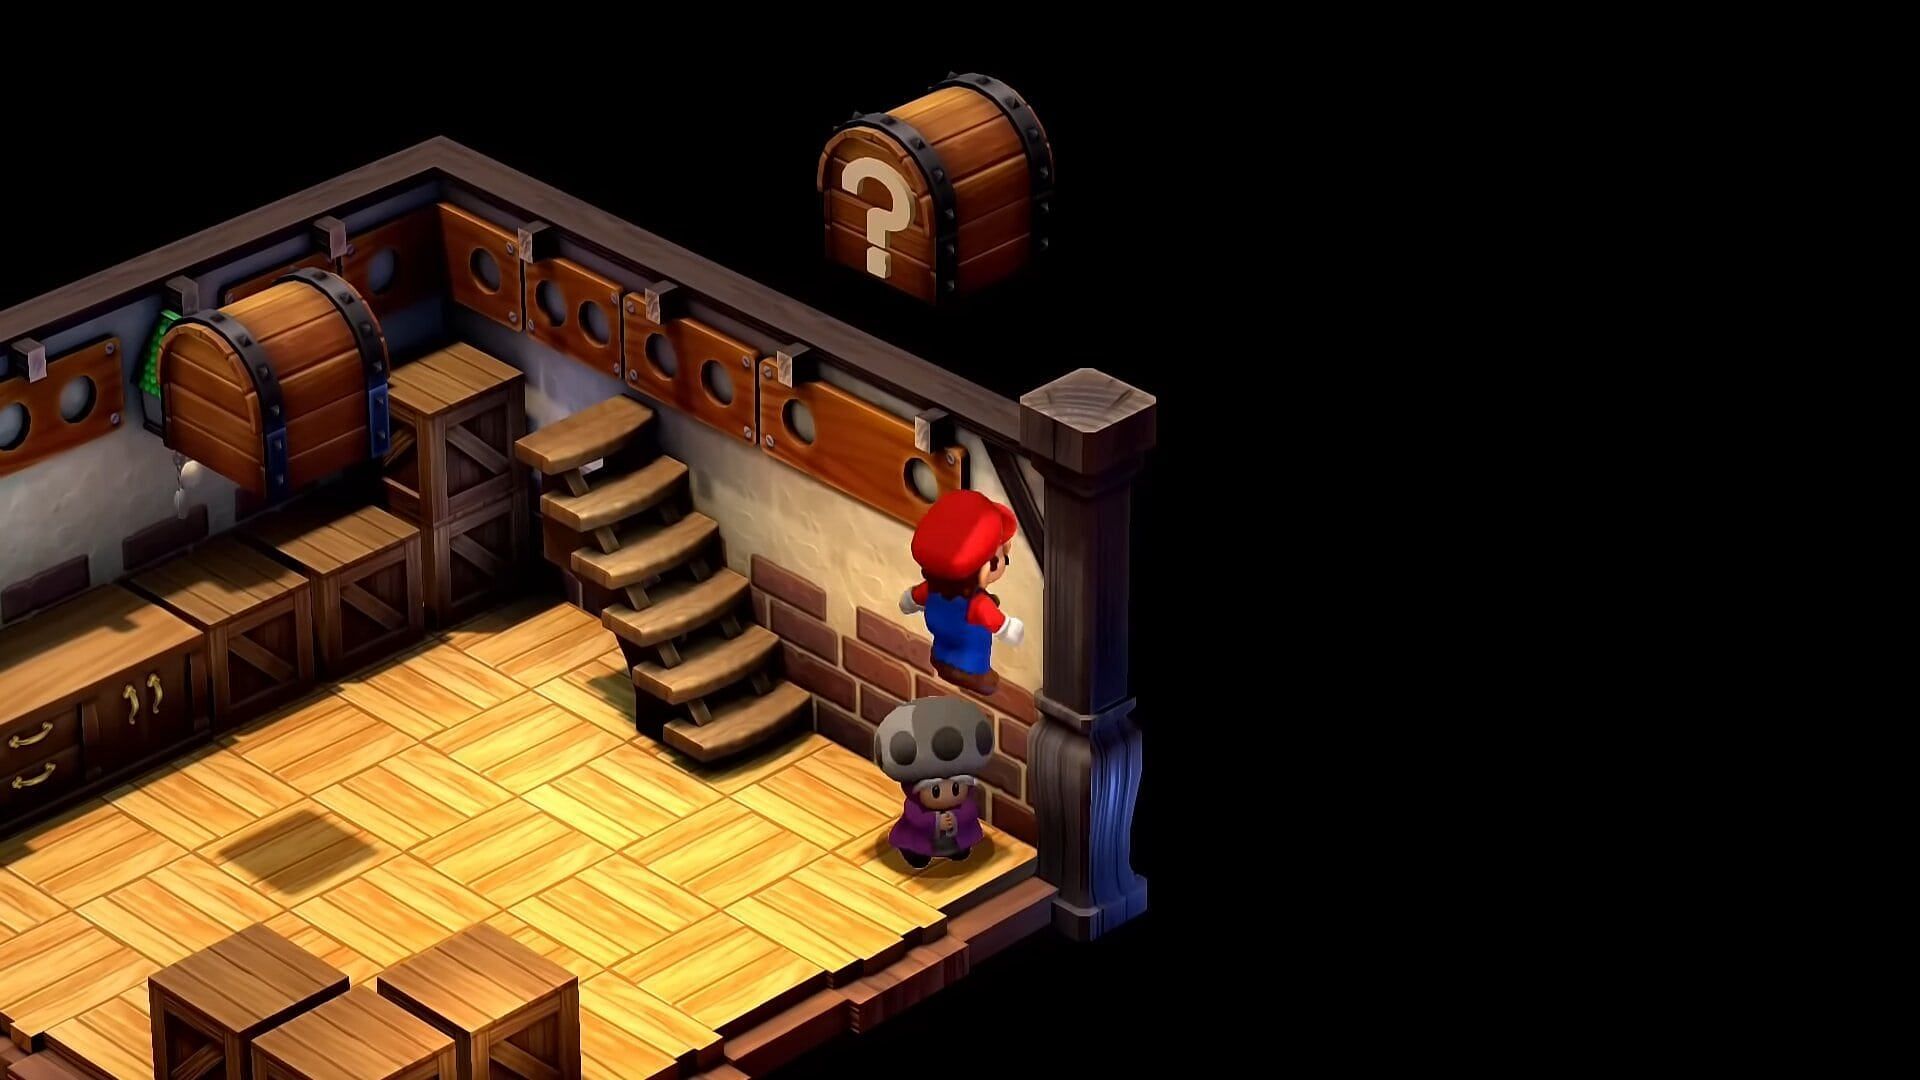 The second hidden treasure is located in this corner of the room (Image via Nintendo)